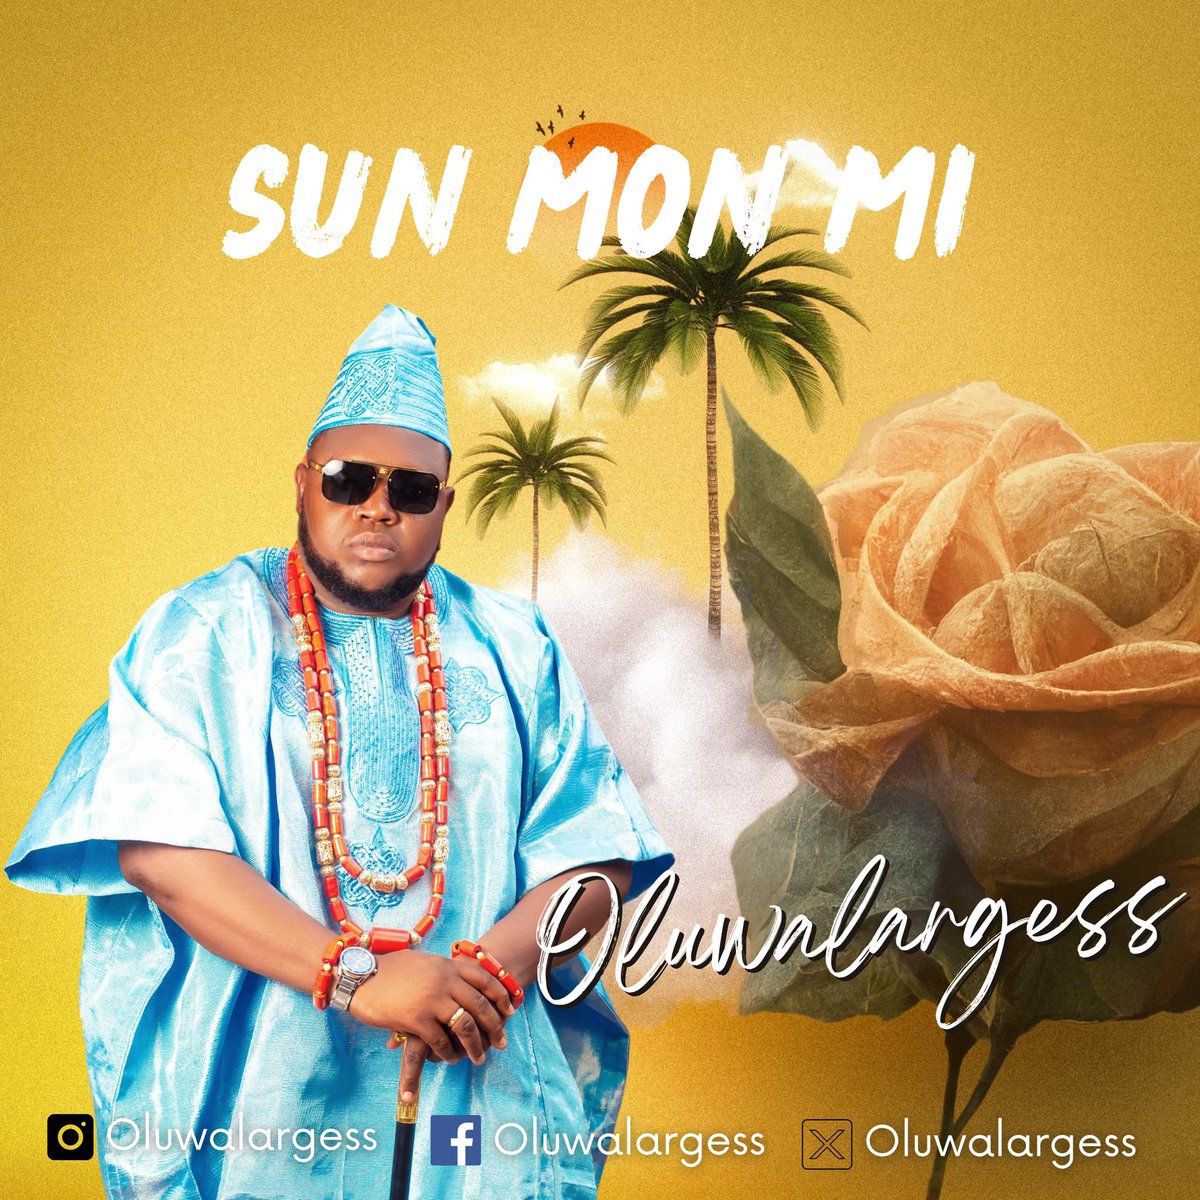 SUN MO MI CHALLENGE ….. post a video of you vibing to the song sun mo mi under this post … and the top 3 videos with the highest form of engagements (repost,likes,comments) gets cash gift • 1st ~~~ 75k •2nd ~~~~ 50k •3rd ~~~~~ 25k Make sure you use the hashtag #SUNMOMI .…